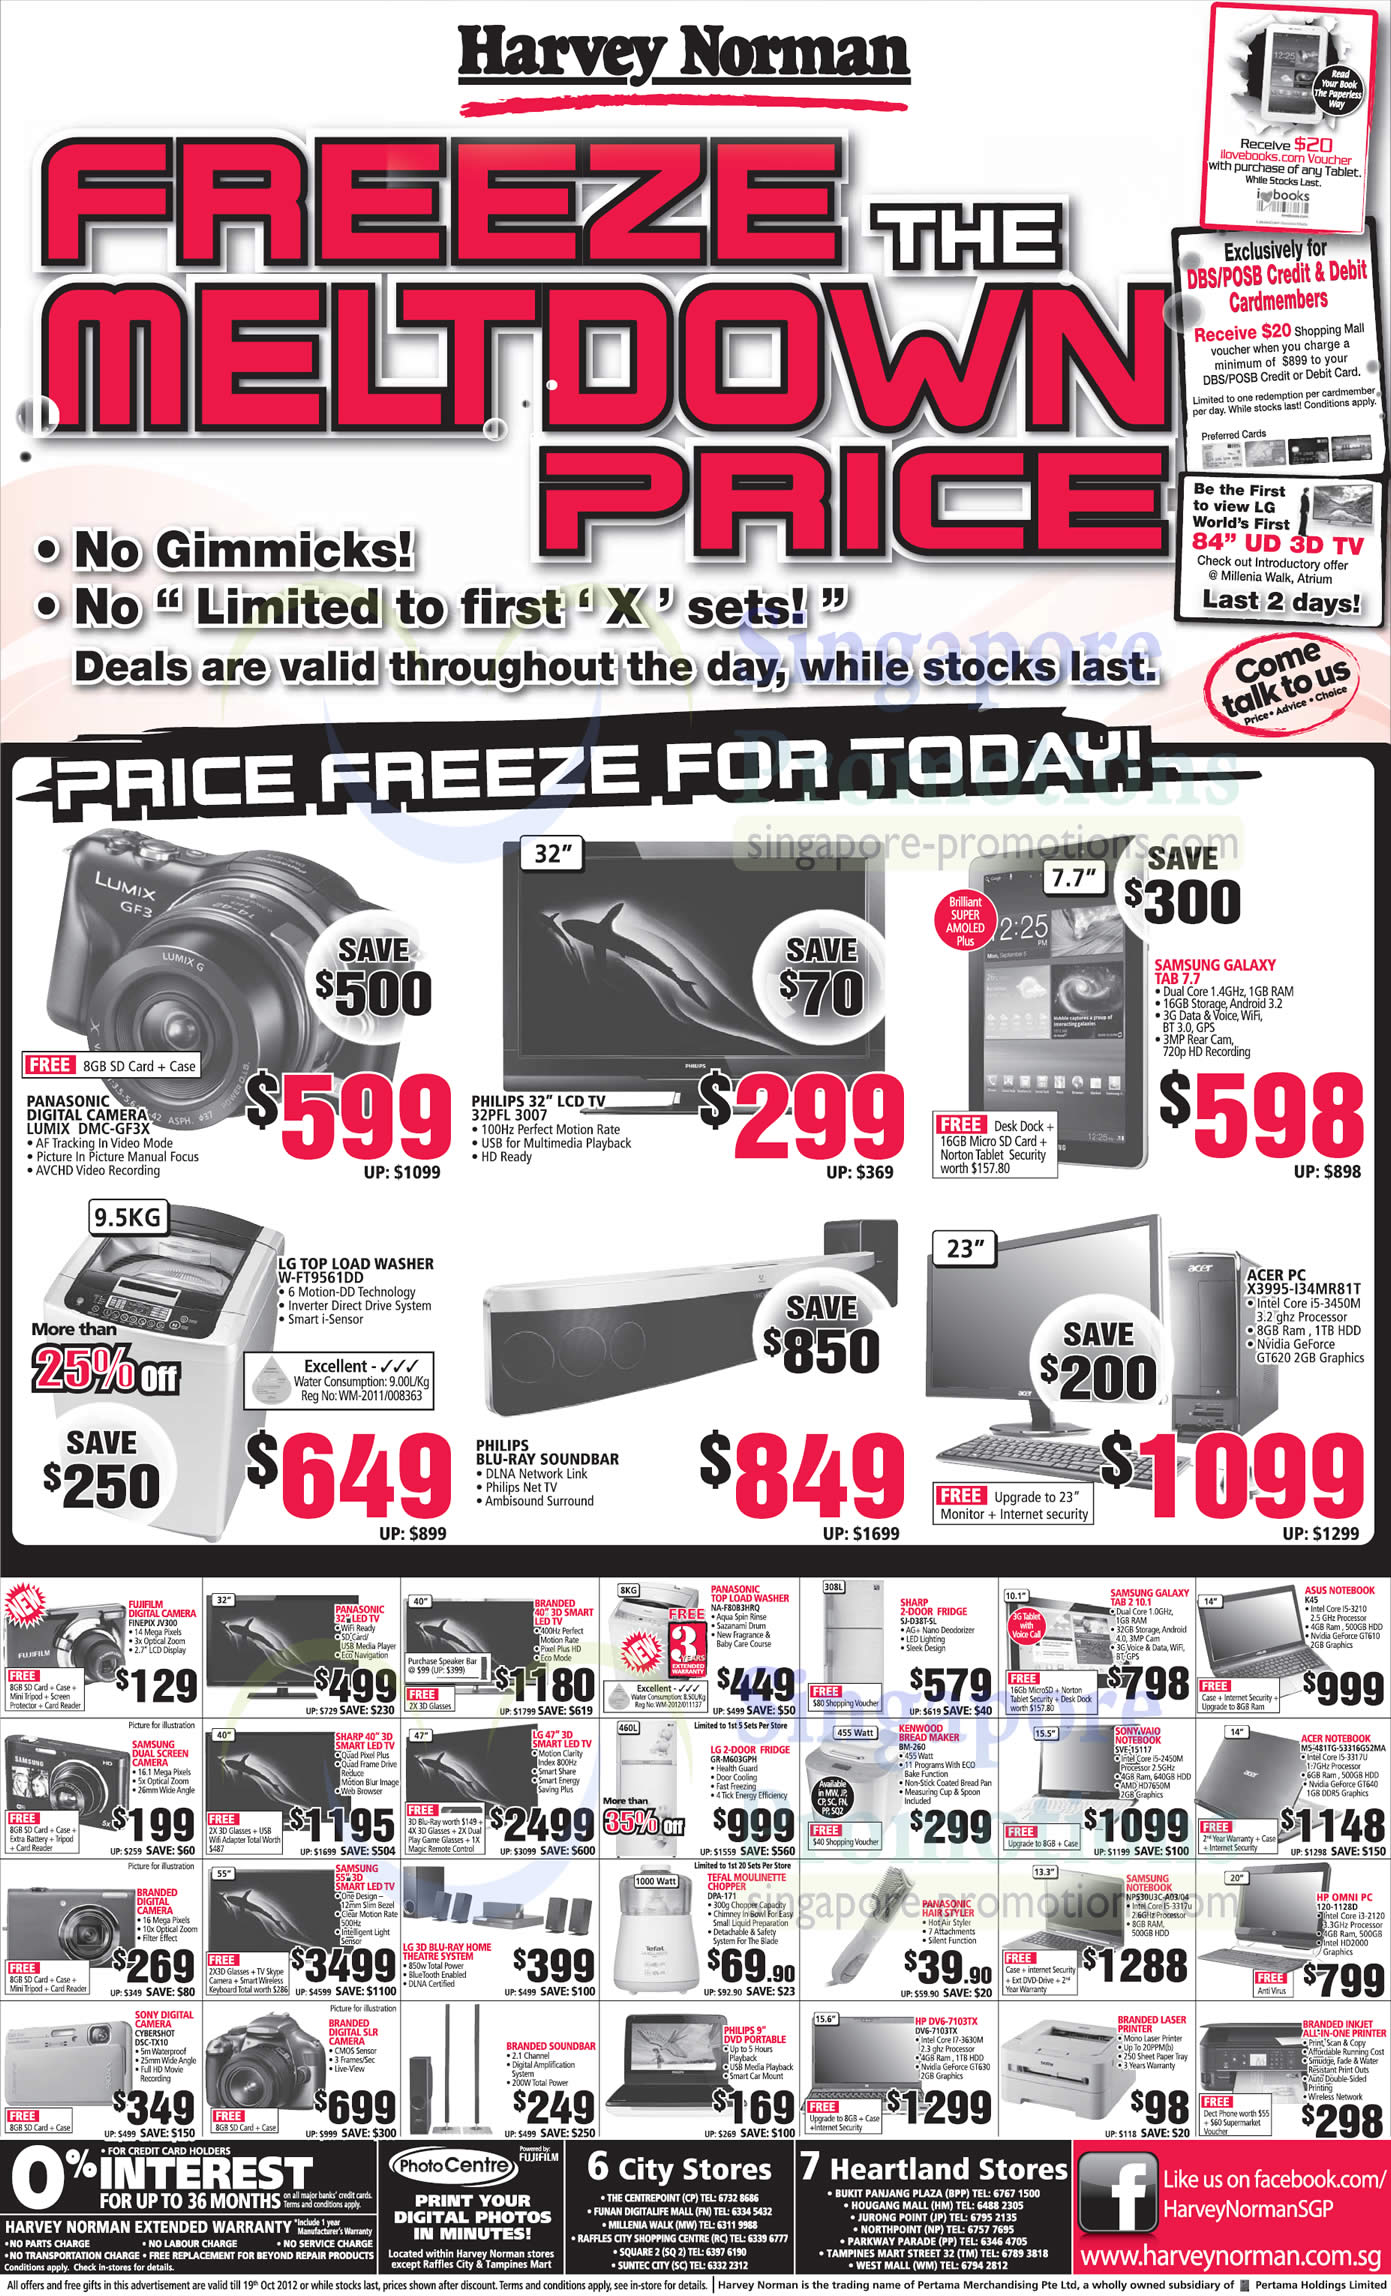 Featured image for Harvey Norman Digital Cameras, Furniture, Notebooks & Appliances Offers 13 - 19 Oct 2012